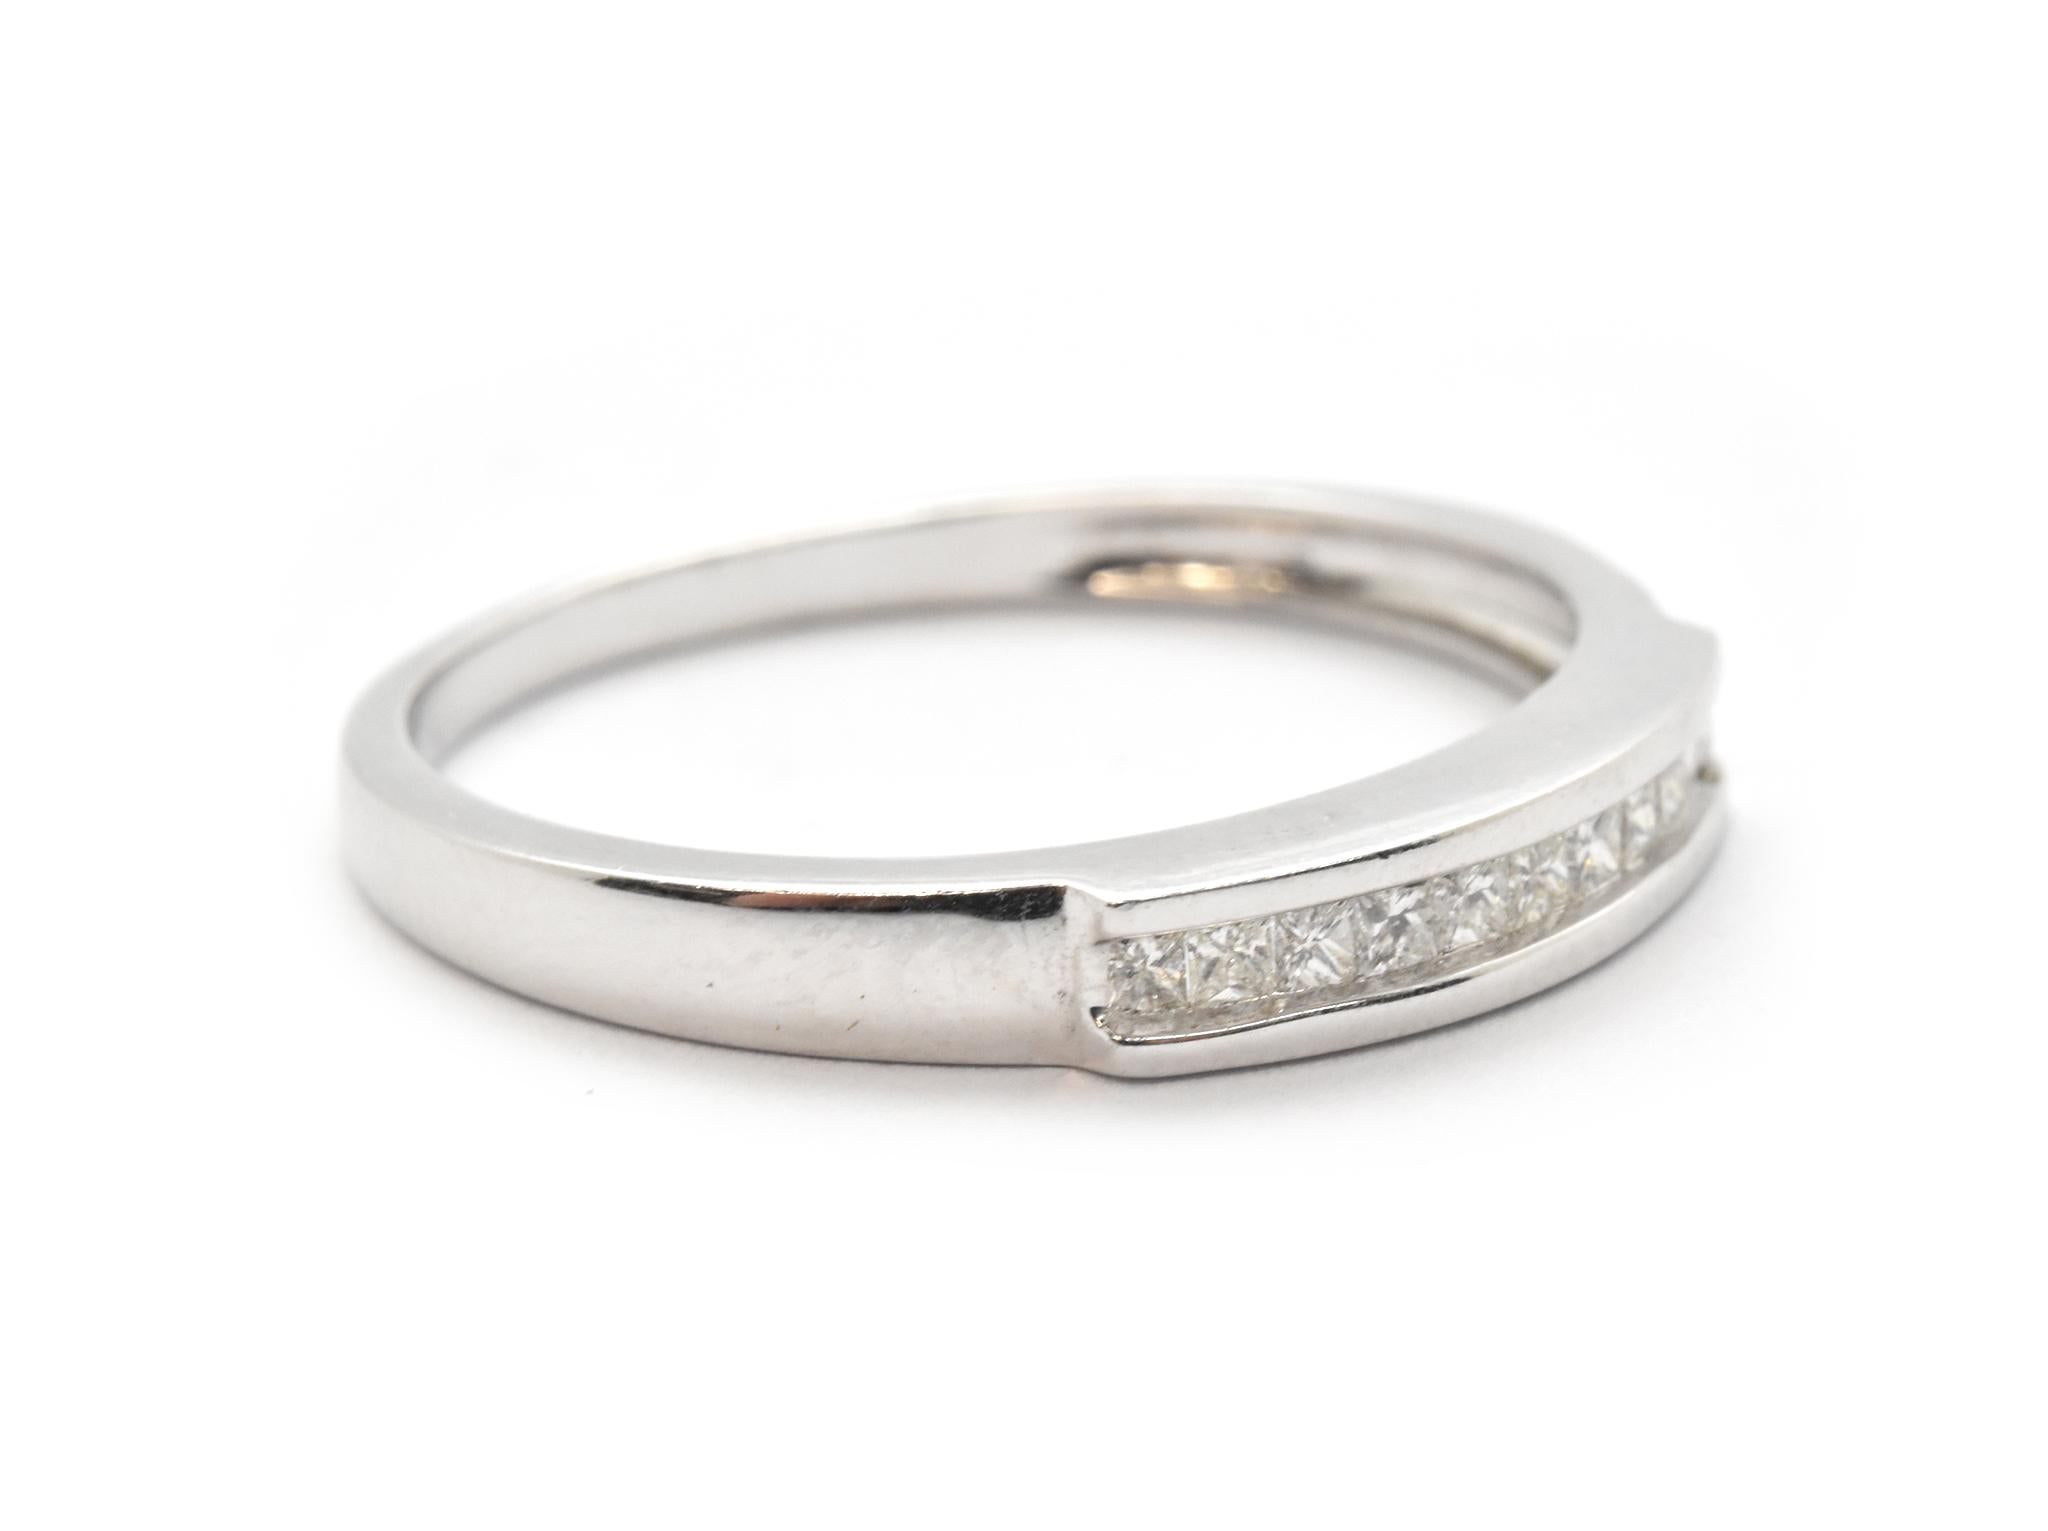 This princess cut diamond wedding band is the perfect way to show your lover their true importance! Diamonds are channel set and reach 0.33cttw. There is a beveled edge in the ring that separates where the diamonds are set from the band. Band size